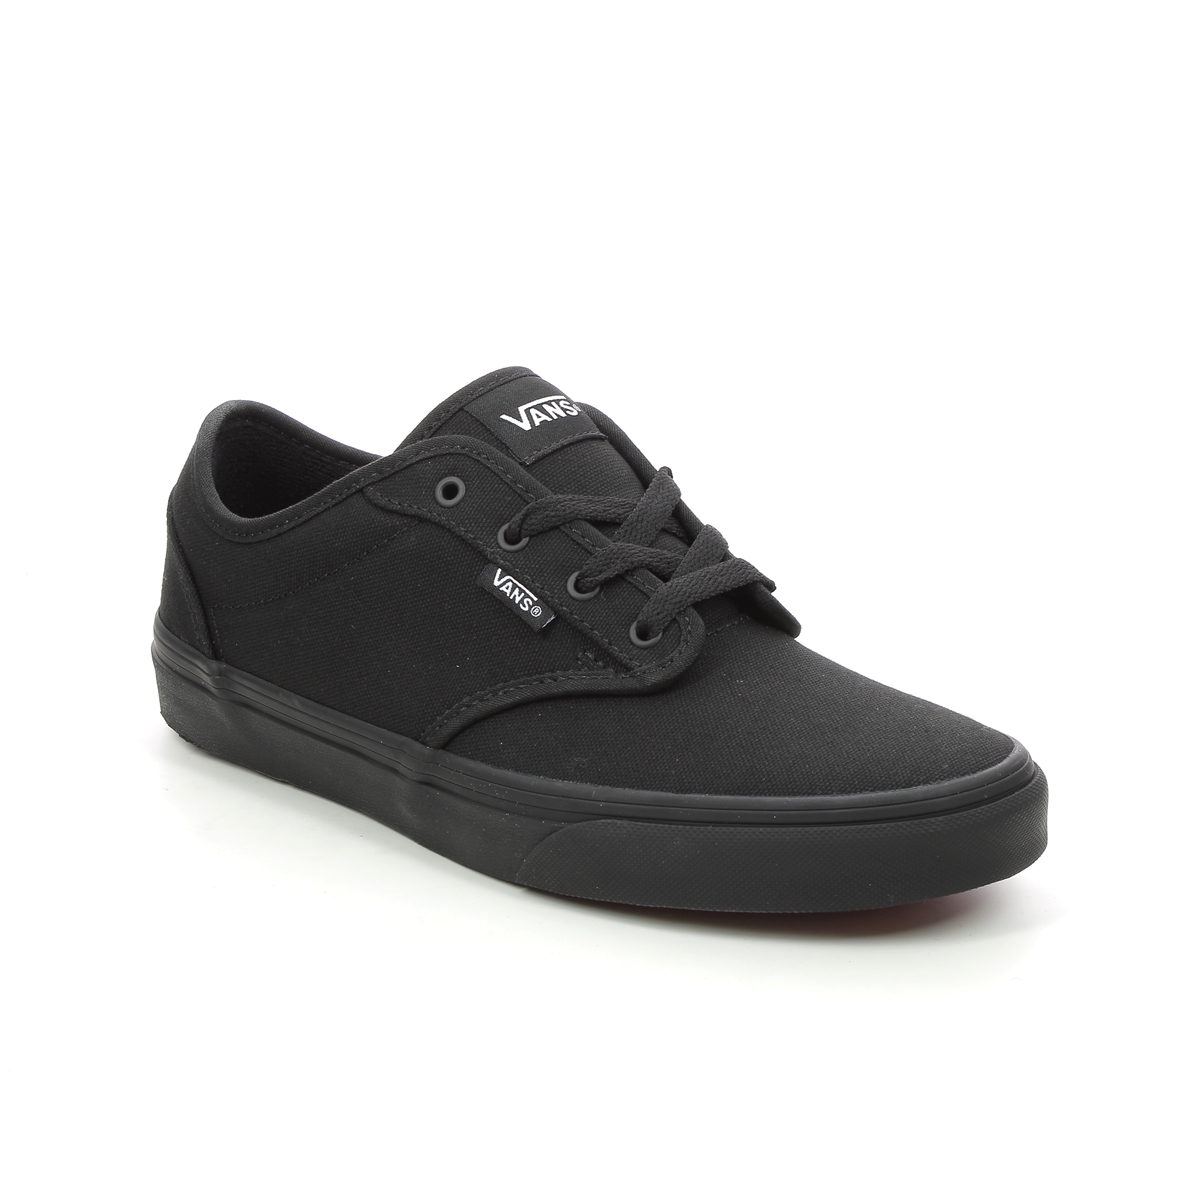 Vans Atwood Youth Black Kids Trainers  Vki5186 In Size 5 In Plain Black Vans Boys Trainers For School For kids